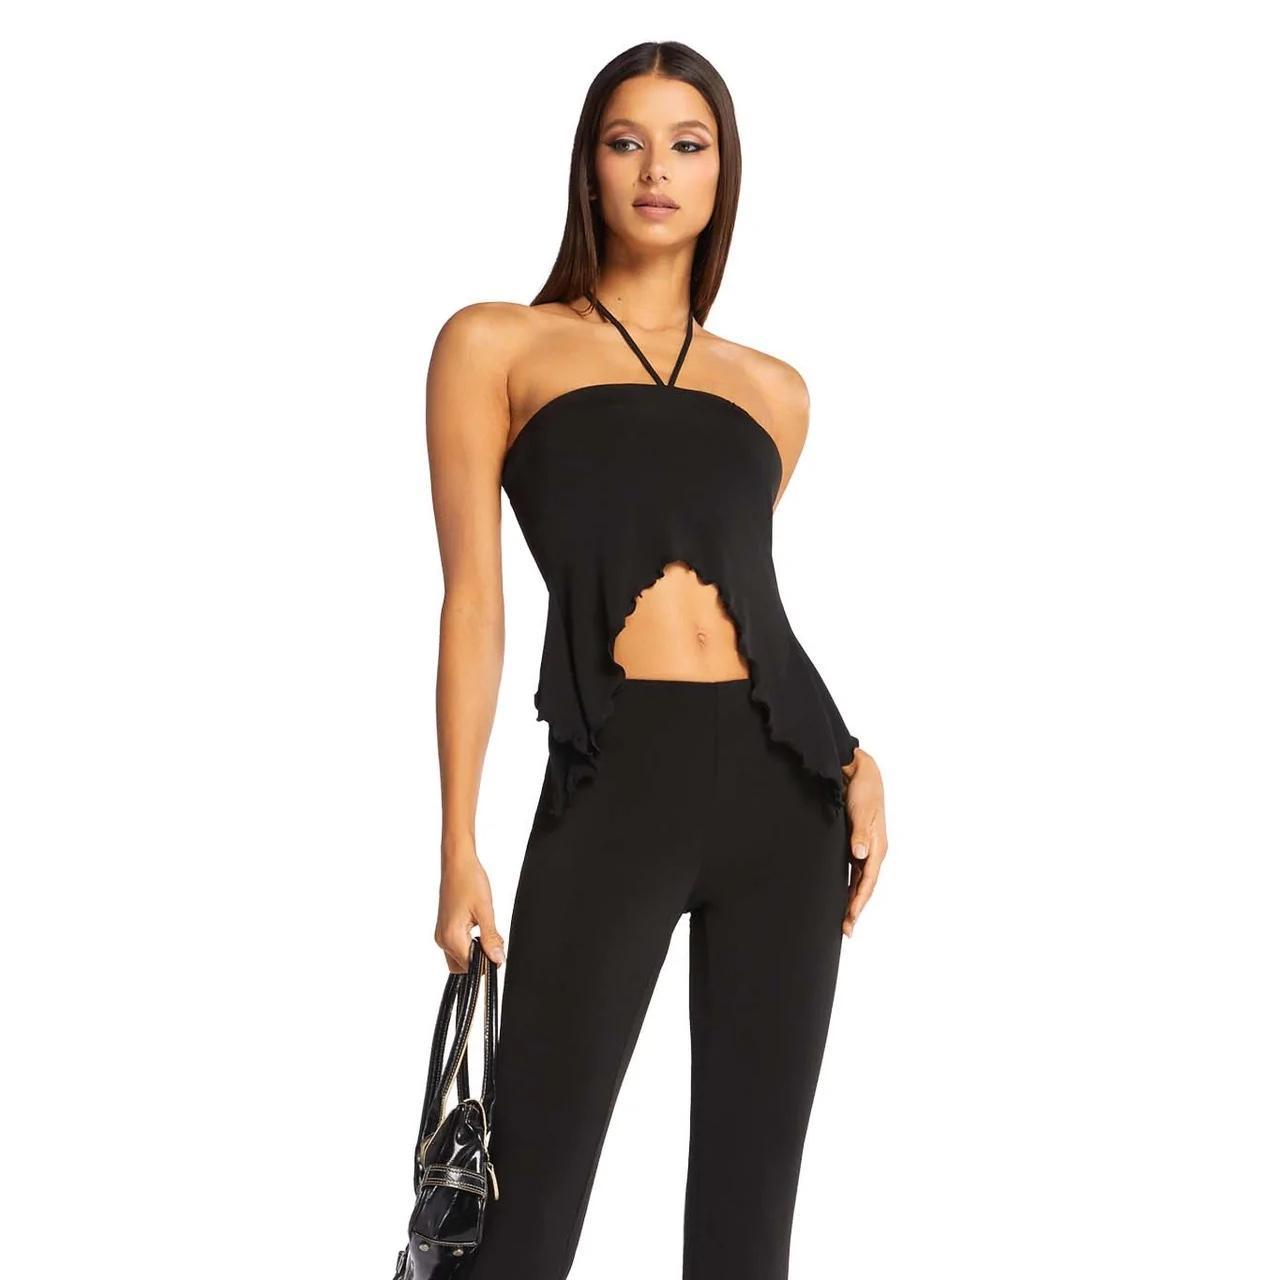 Product Image 3 - I.AM.GIA black strapless top
Size: small